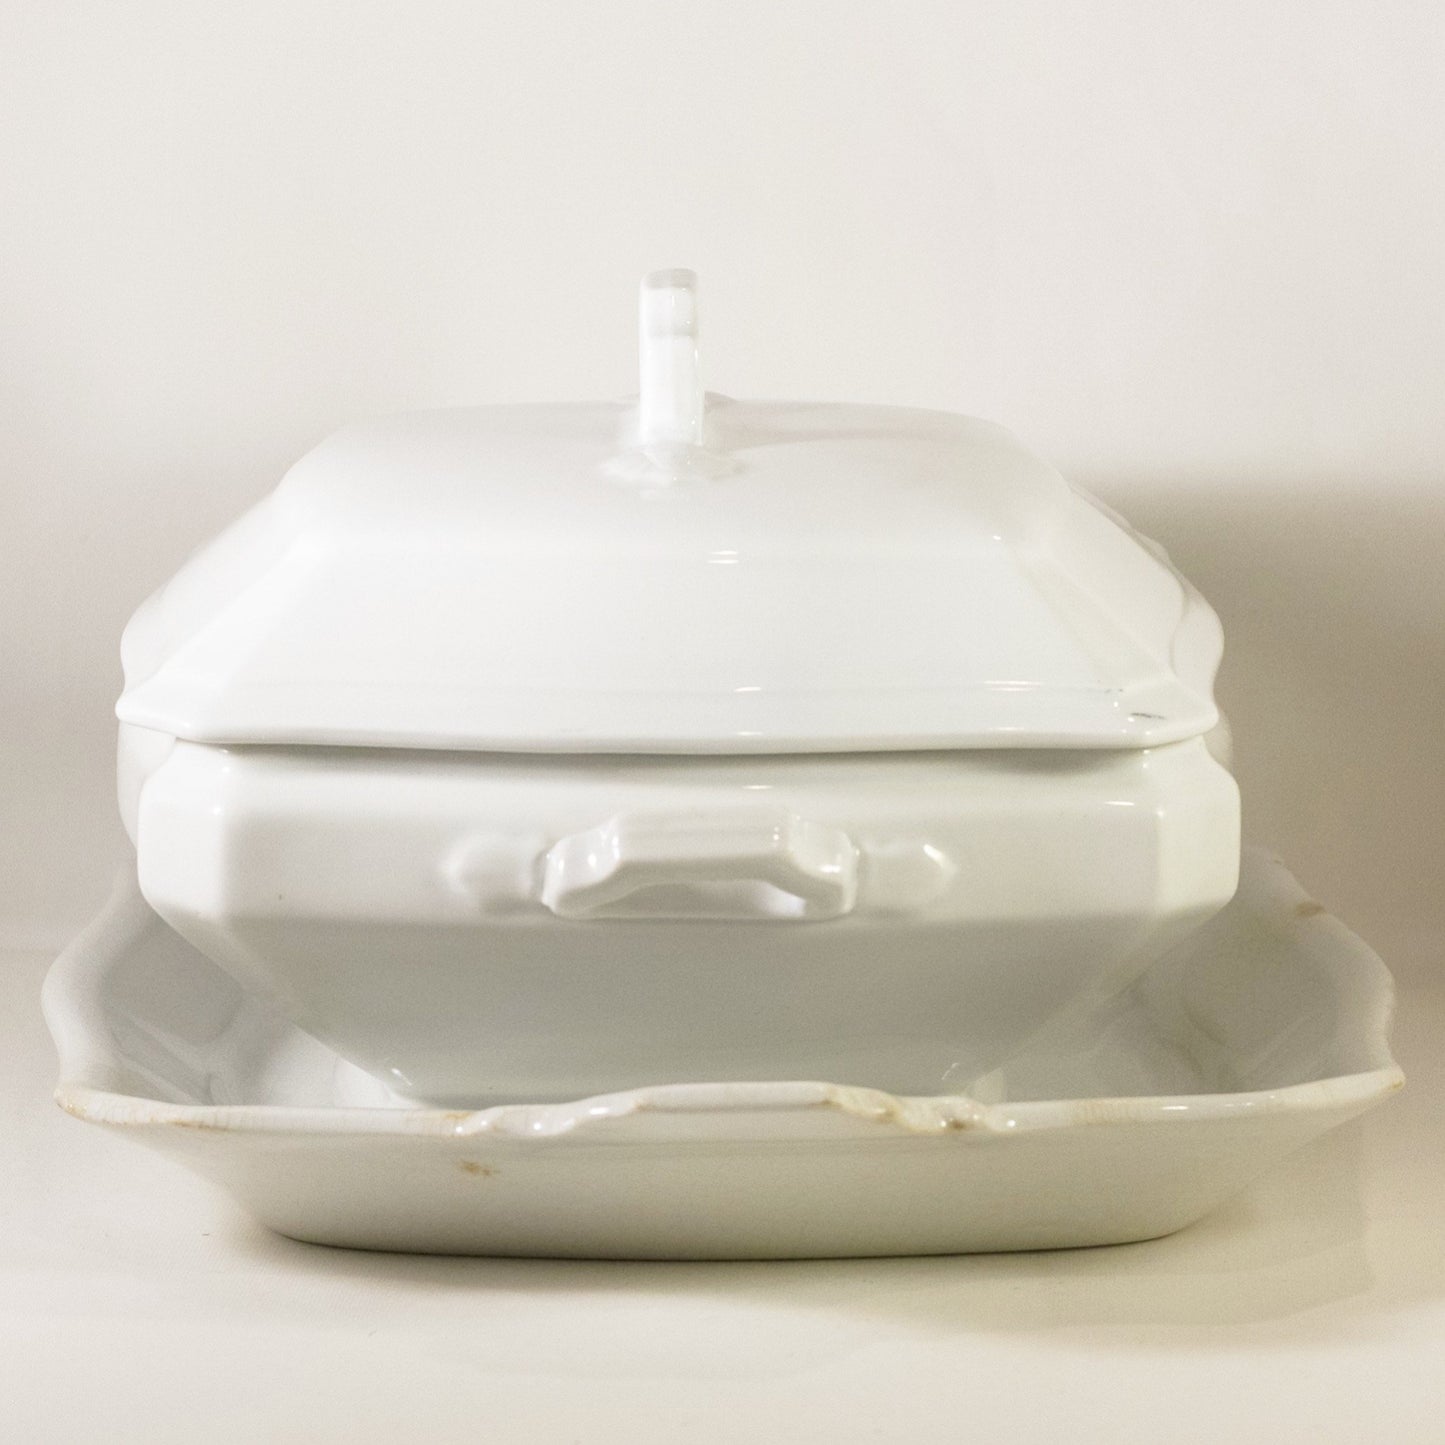 CLASSIC BLOCK OPTIC by J & G Meakin Antique Ironstone Square Covered Dish with Underplate Circa 1890